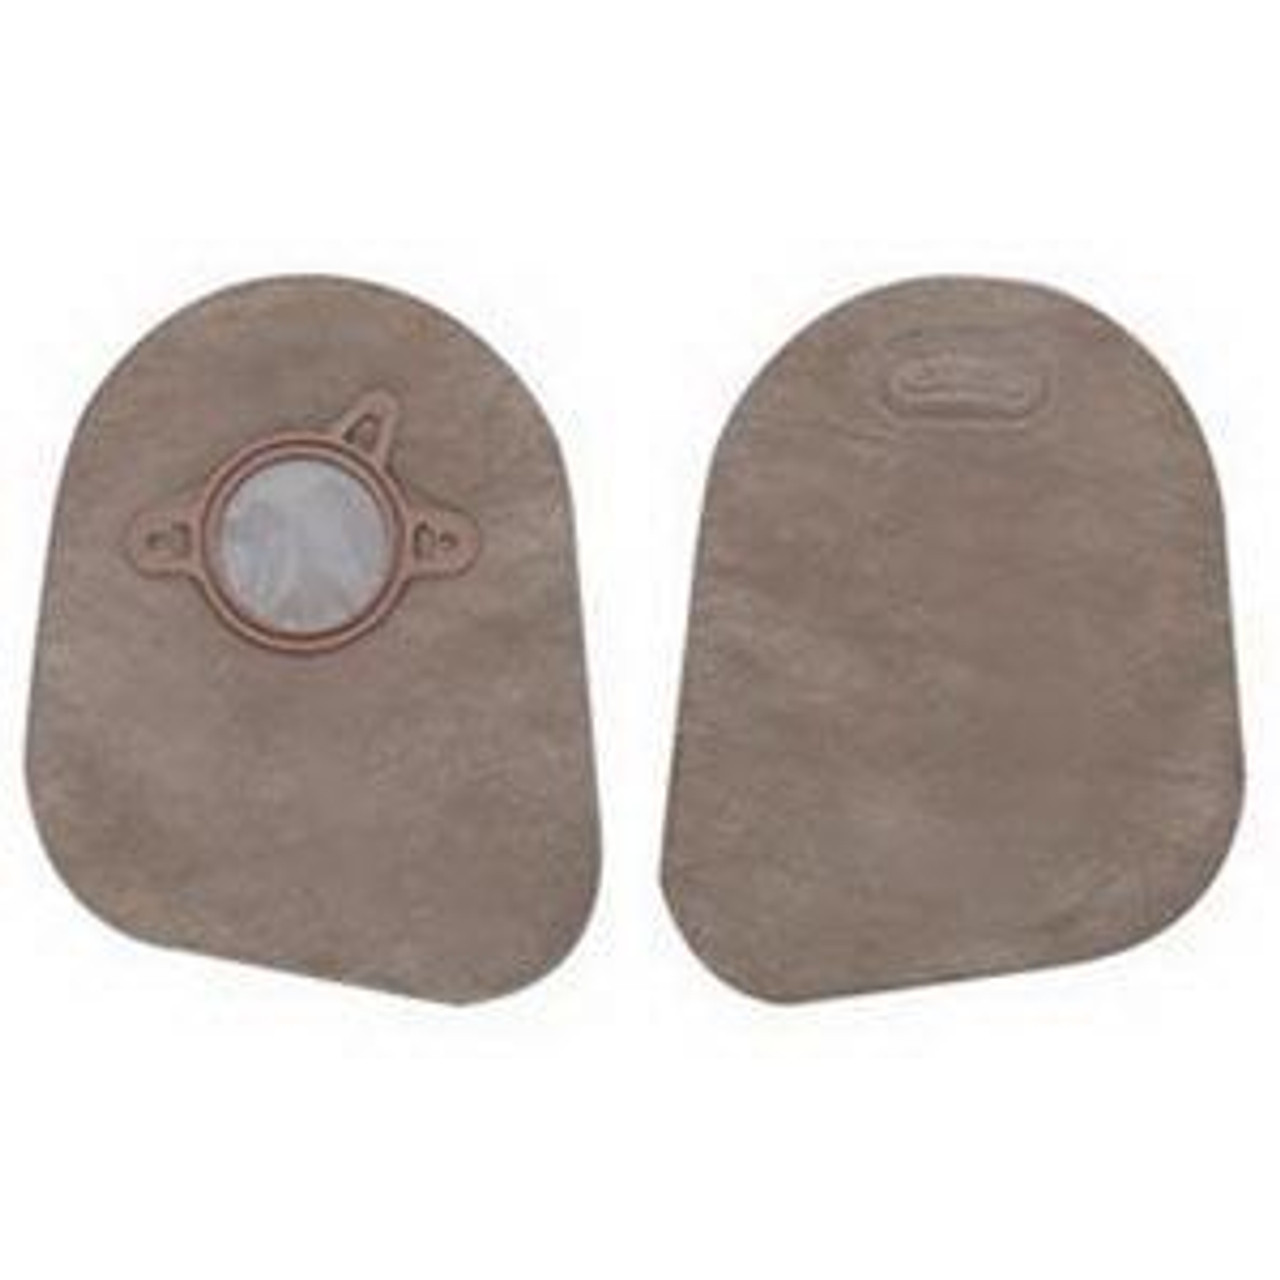 NEW IMAGE CLOSED MINI Pouch, FILTER, 1 3/4" FLANGE, BEIGE BX/60 (HOL-18392) (Hollister 18392)